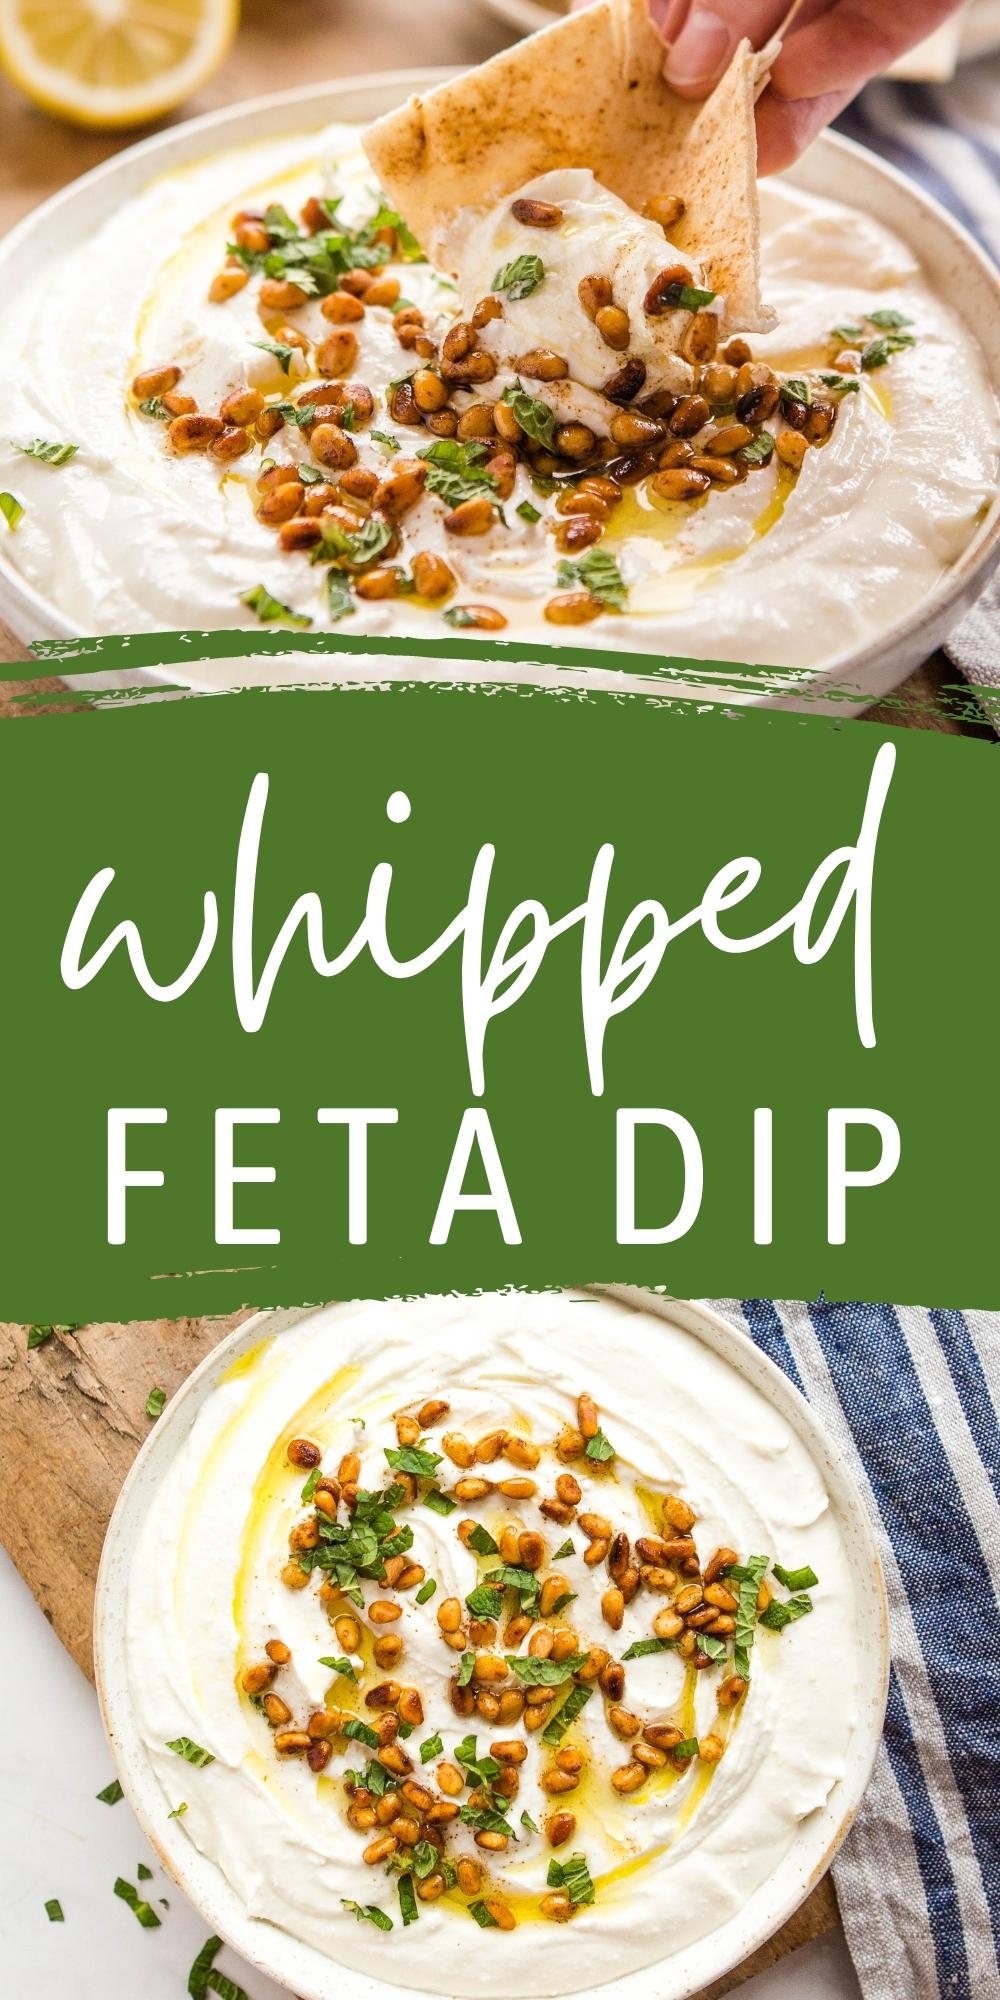 This Whipped Feta Dip is the perfect ultra rich & creamy appetizer for all your Mediterranean meals. Made with feta and Greek yogurt, and easy to serve with pitas or veggies for dipping! Recipe from thebusybaker.ca! #whippedfetadip #fetadip #mediterranean #greek #appetizer #easyappetizer #lowcarb #cheese via @busybakerblog